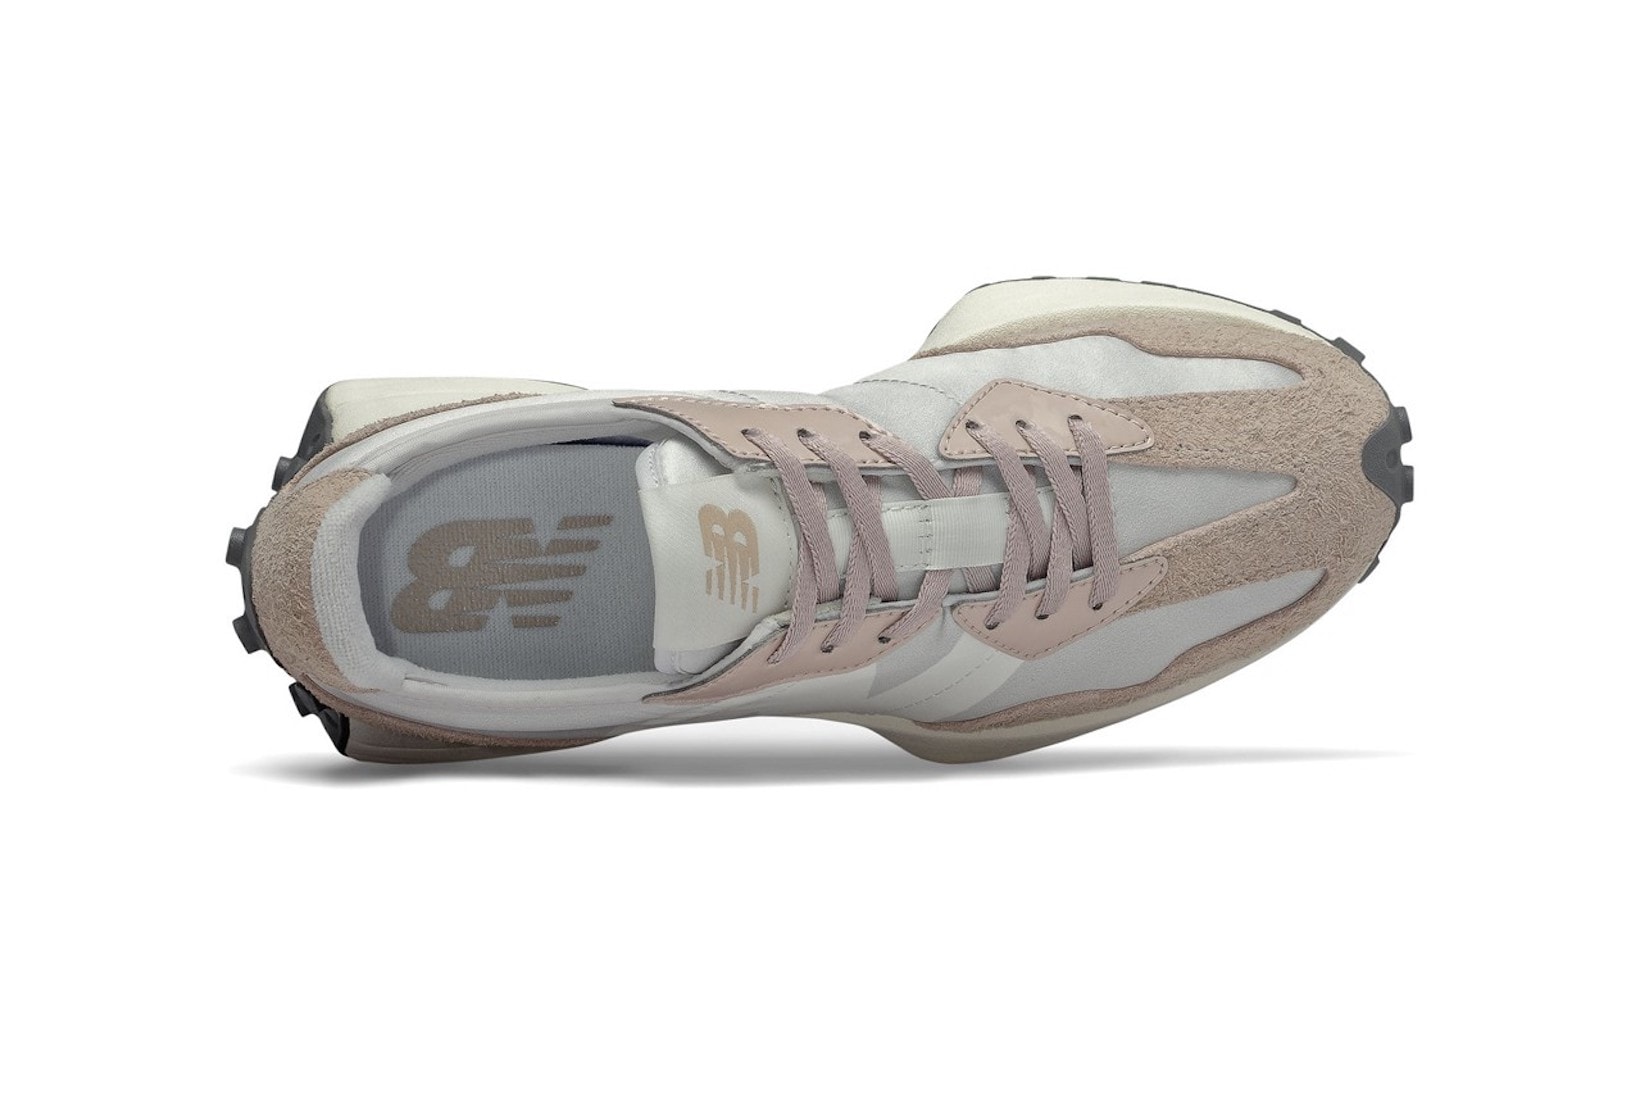 new balance 327 sneakers nude muted pink gray cream shoes sneakerhead footwear